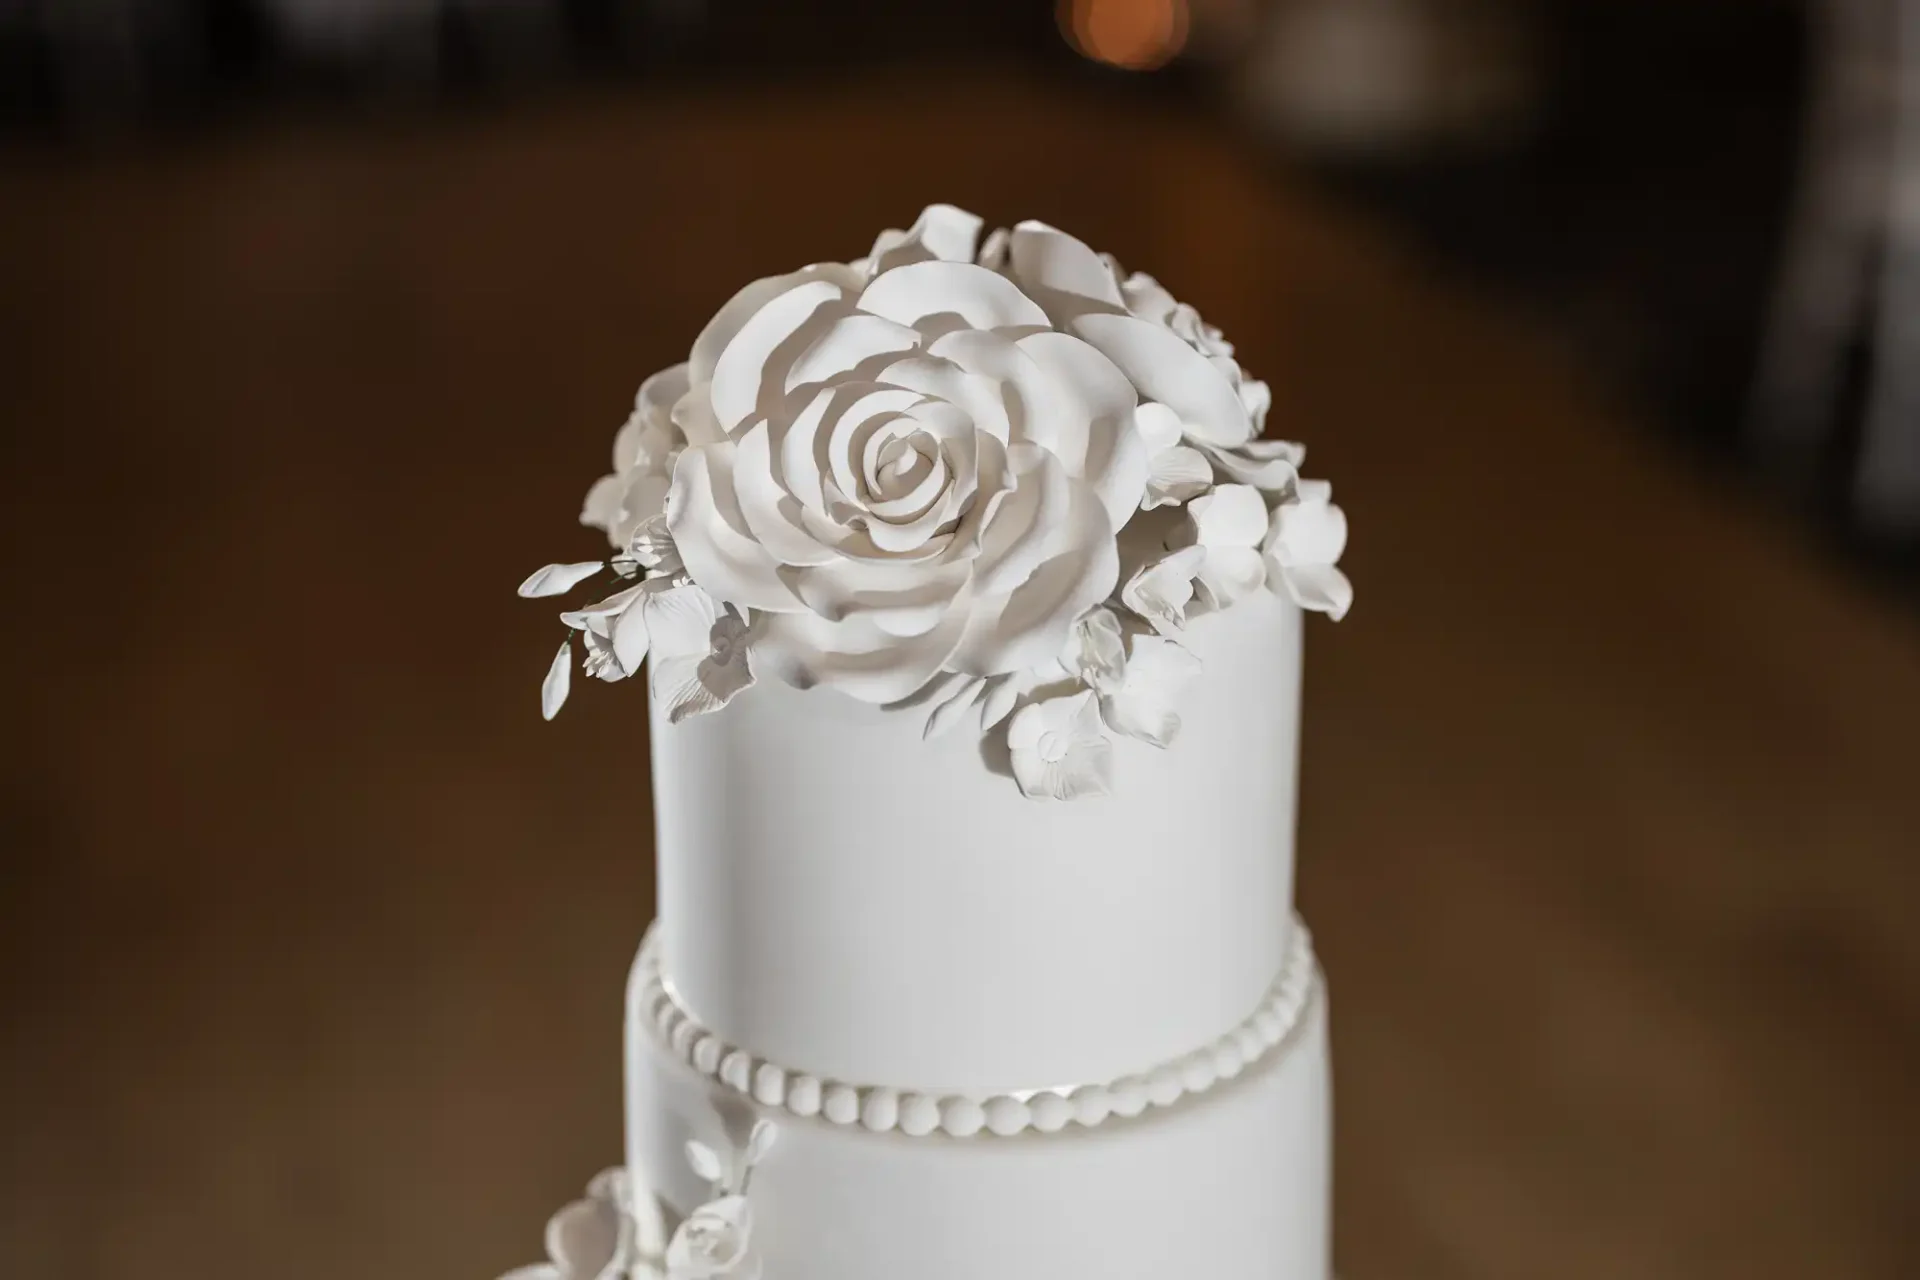 A two-tiered white wedding cake decorated with intricate white sugar flowers on top.